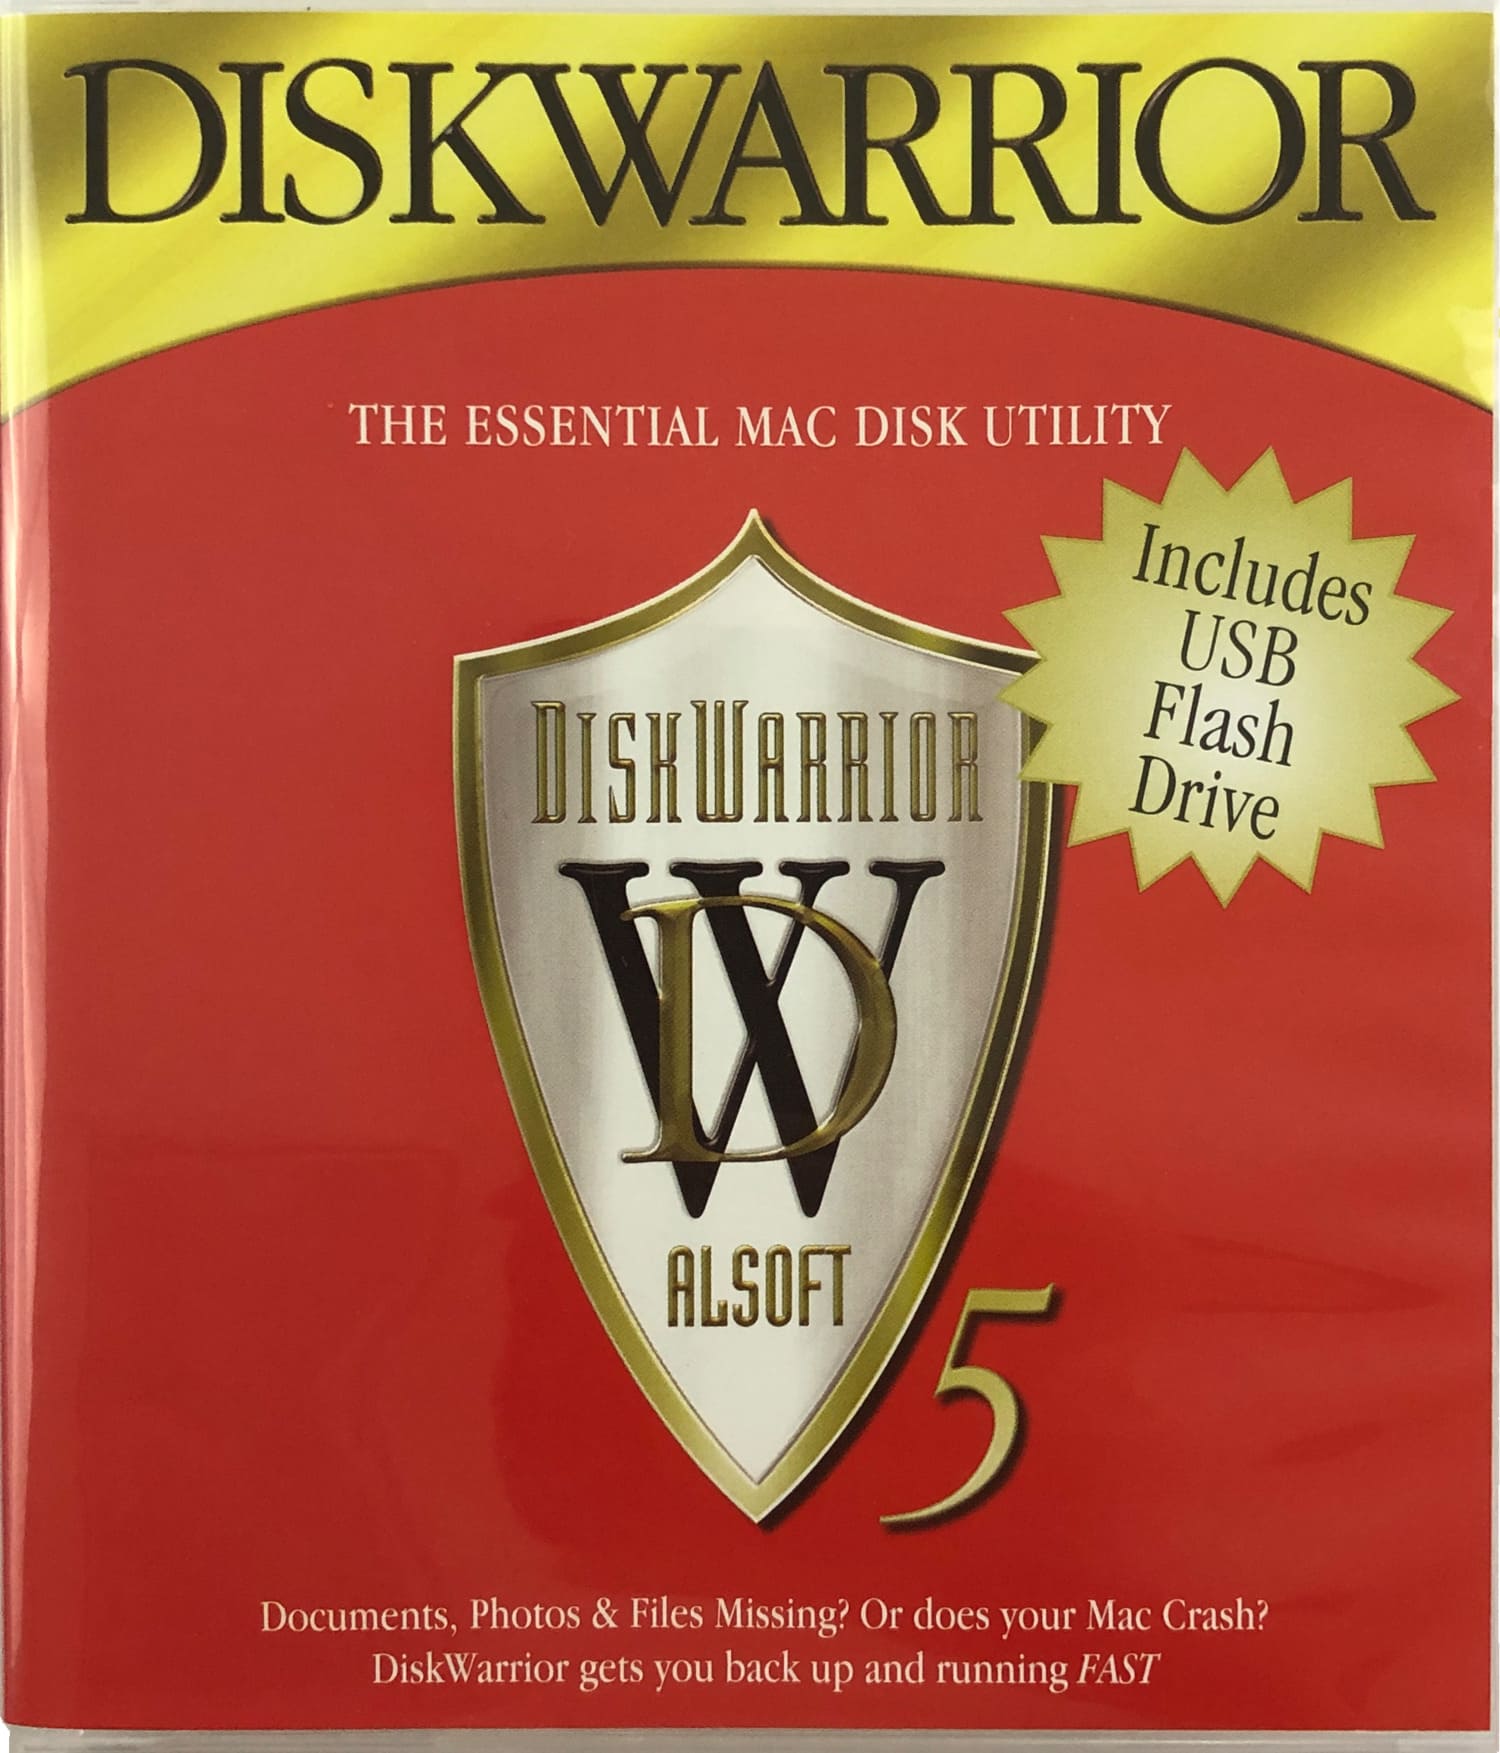 How to Use DiskWarrior